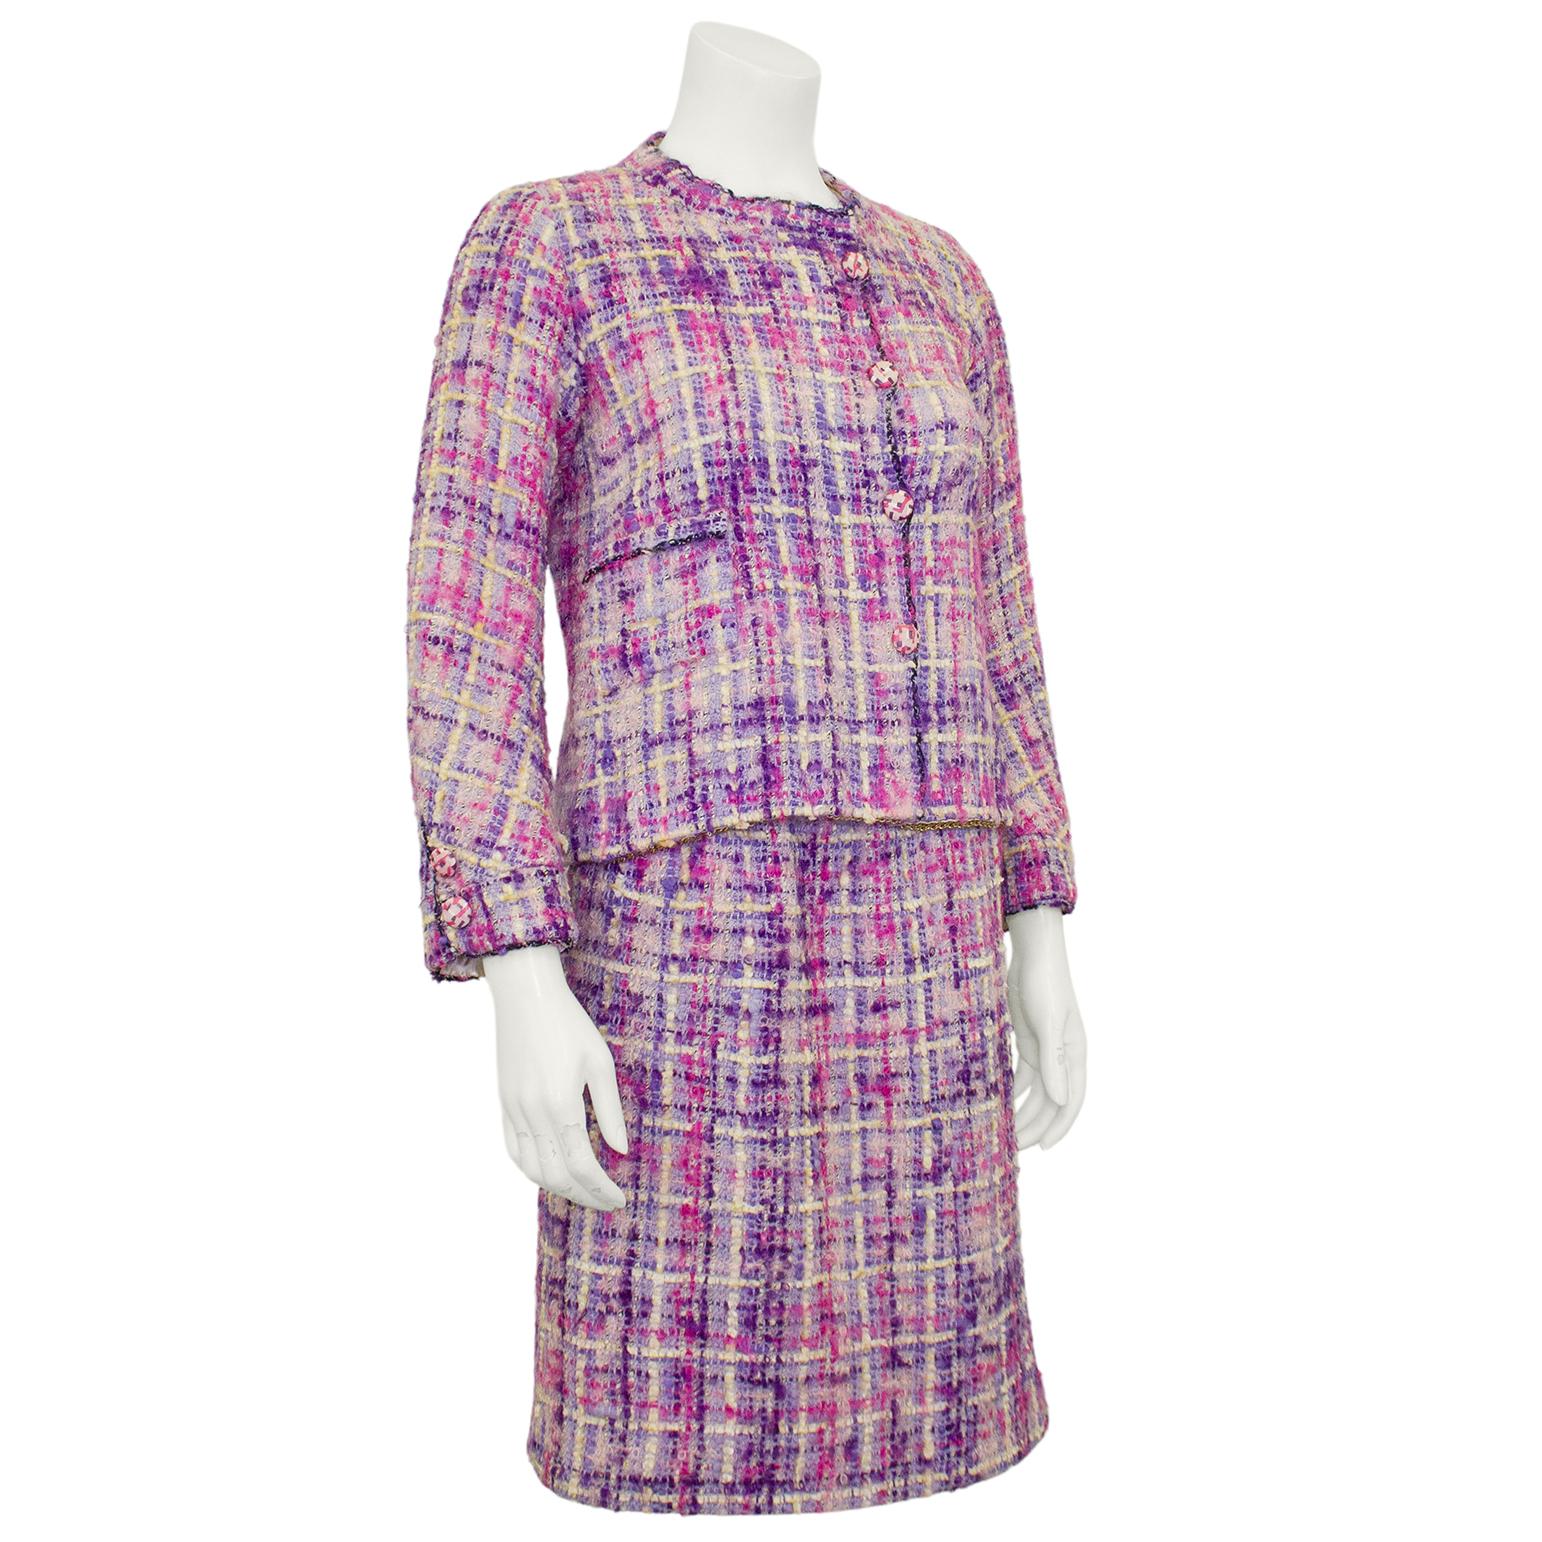 A glorious Chanel Haute Couture jacket and dress from the 1960s. Crafted from beautiful pink, purple and cream tweed with thin black trim. Collarless jacket with a single patch pocket at the waist on the right side when wearing. Lovely abstract